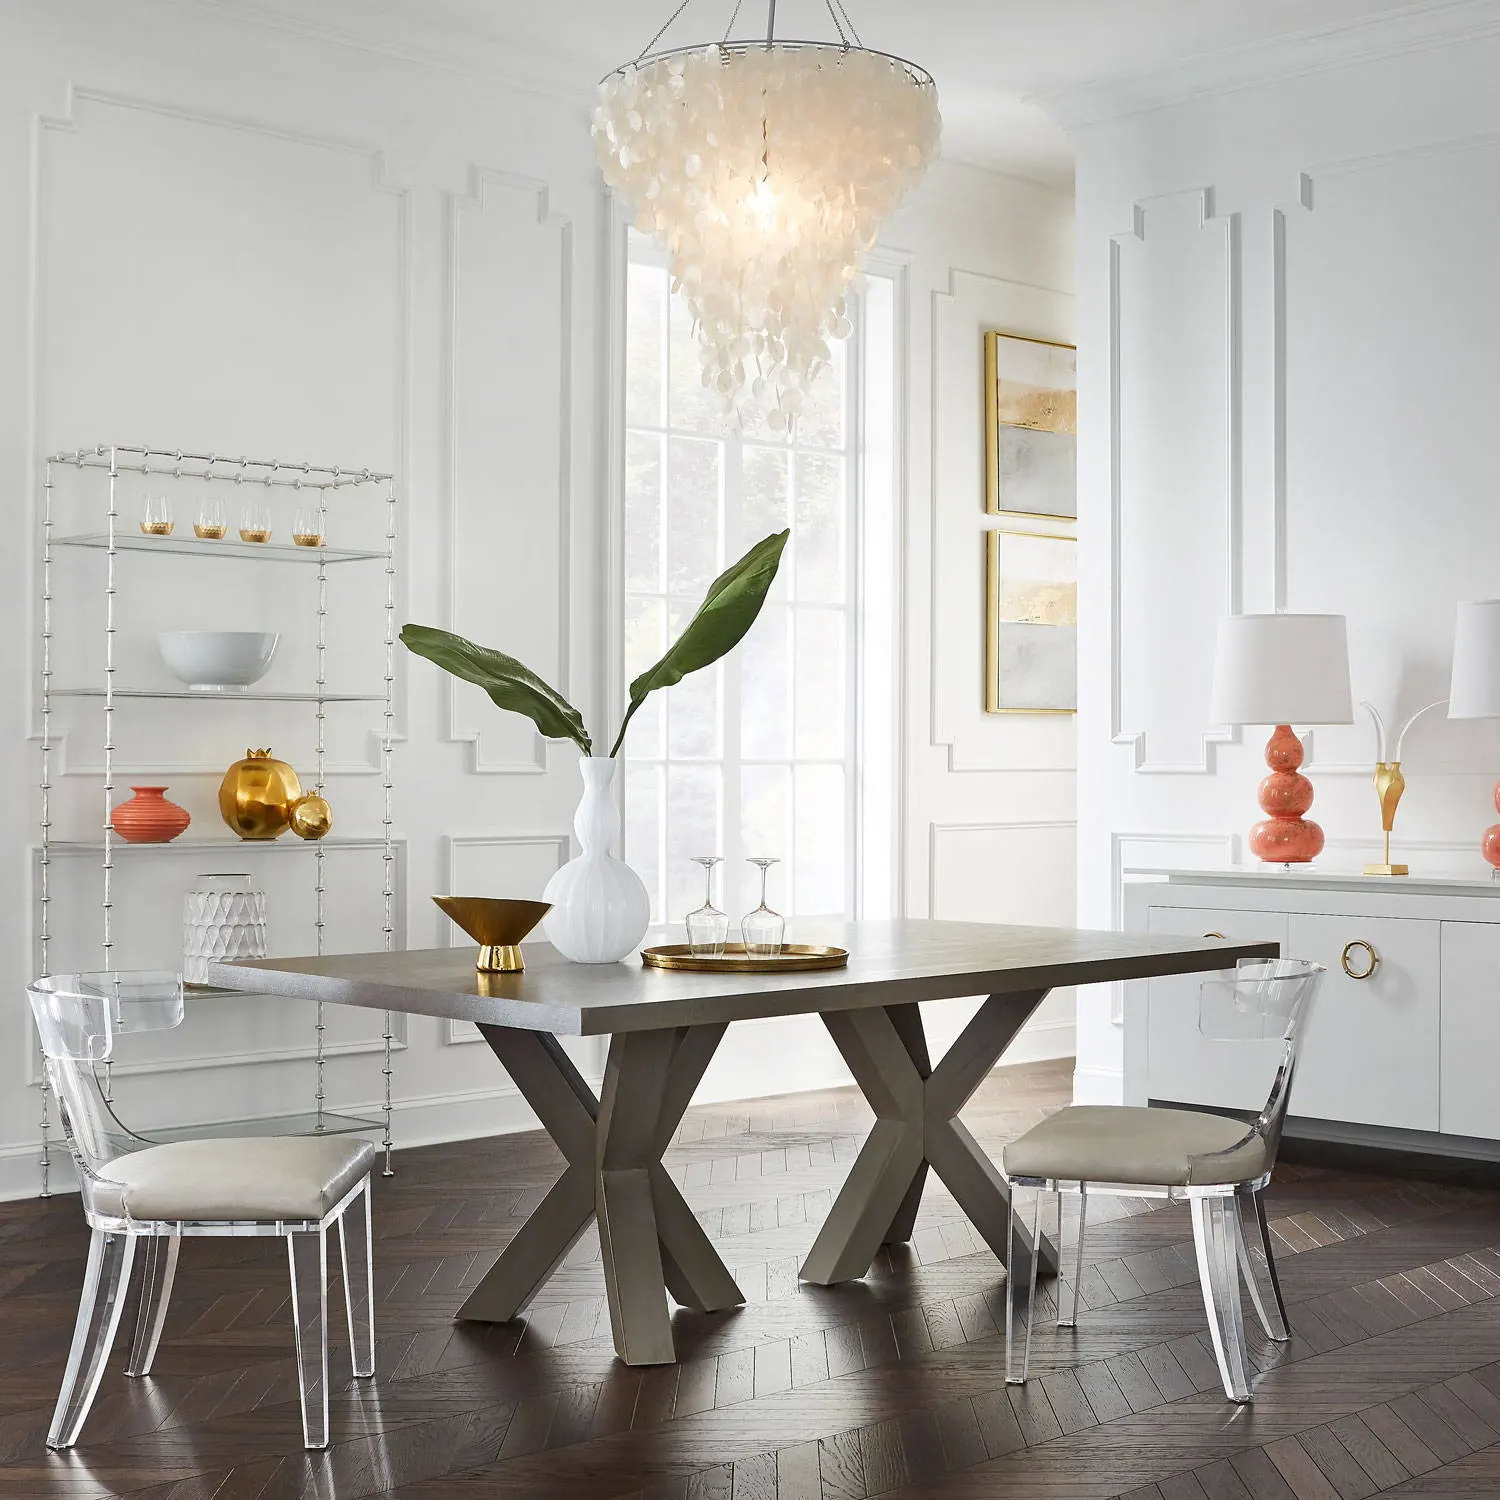 How High to Hang Lighting Above a Dining Table